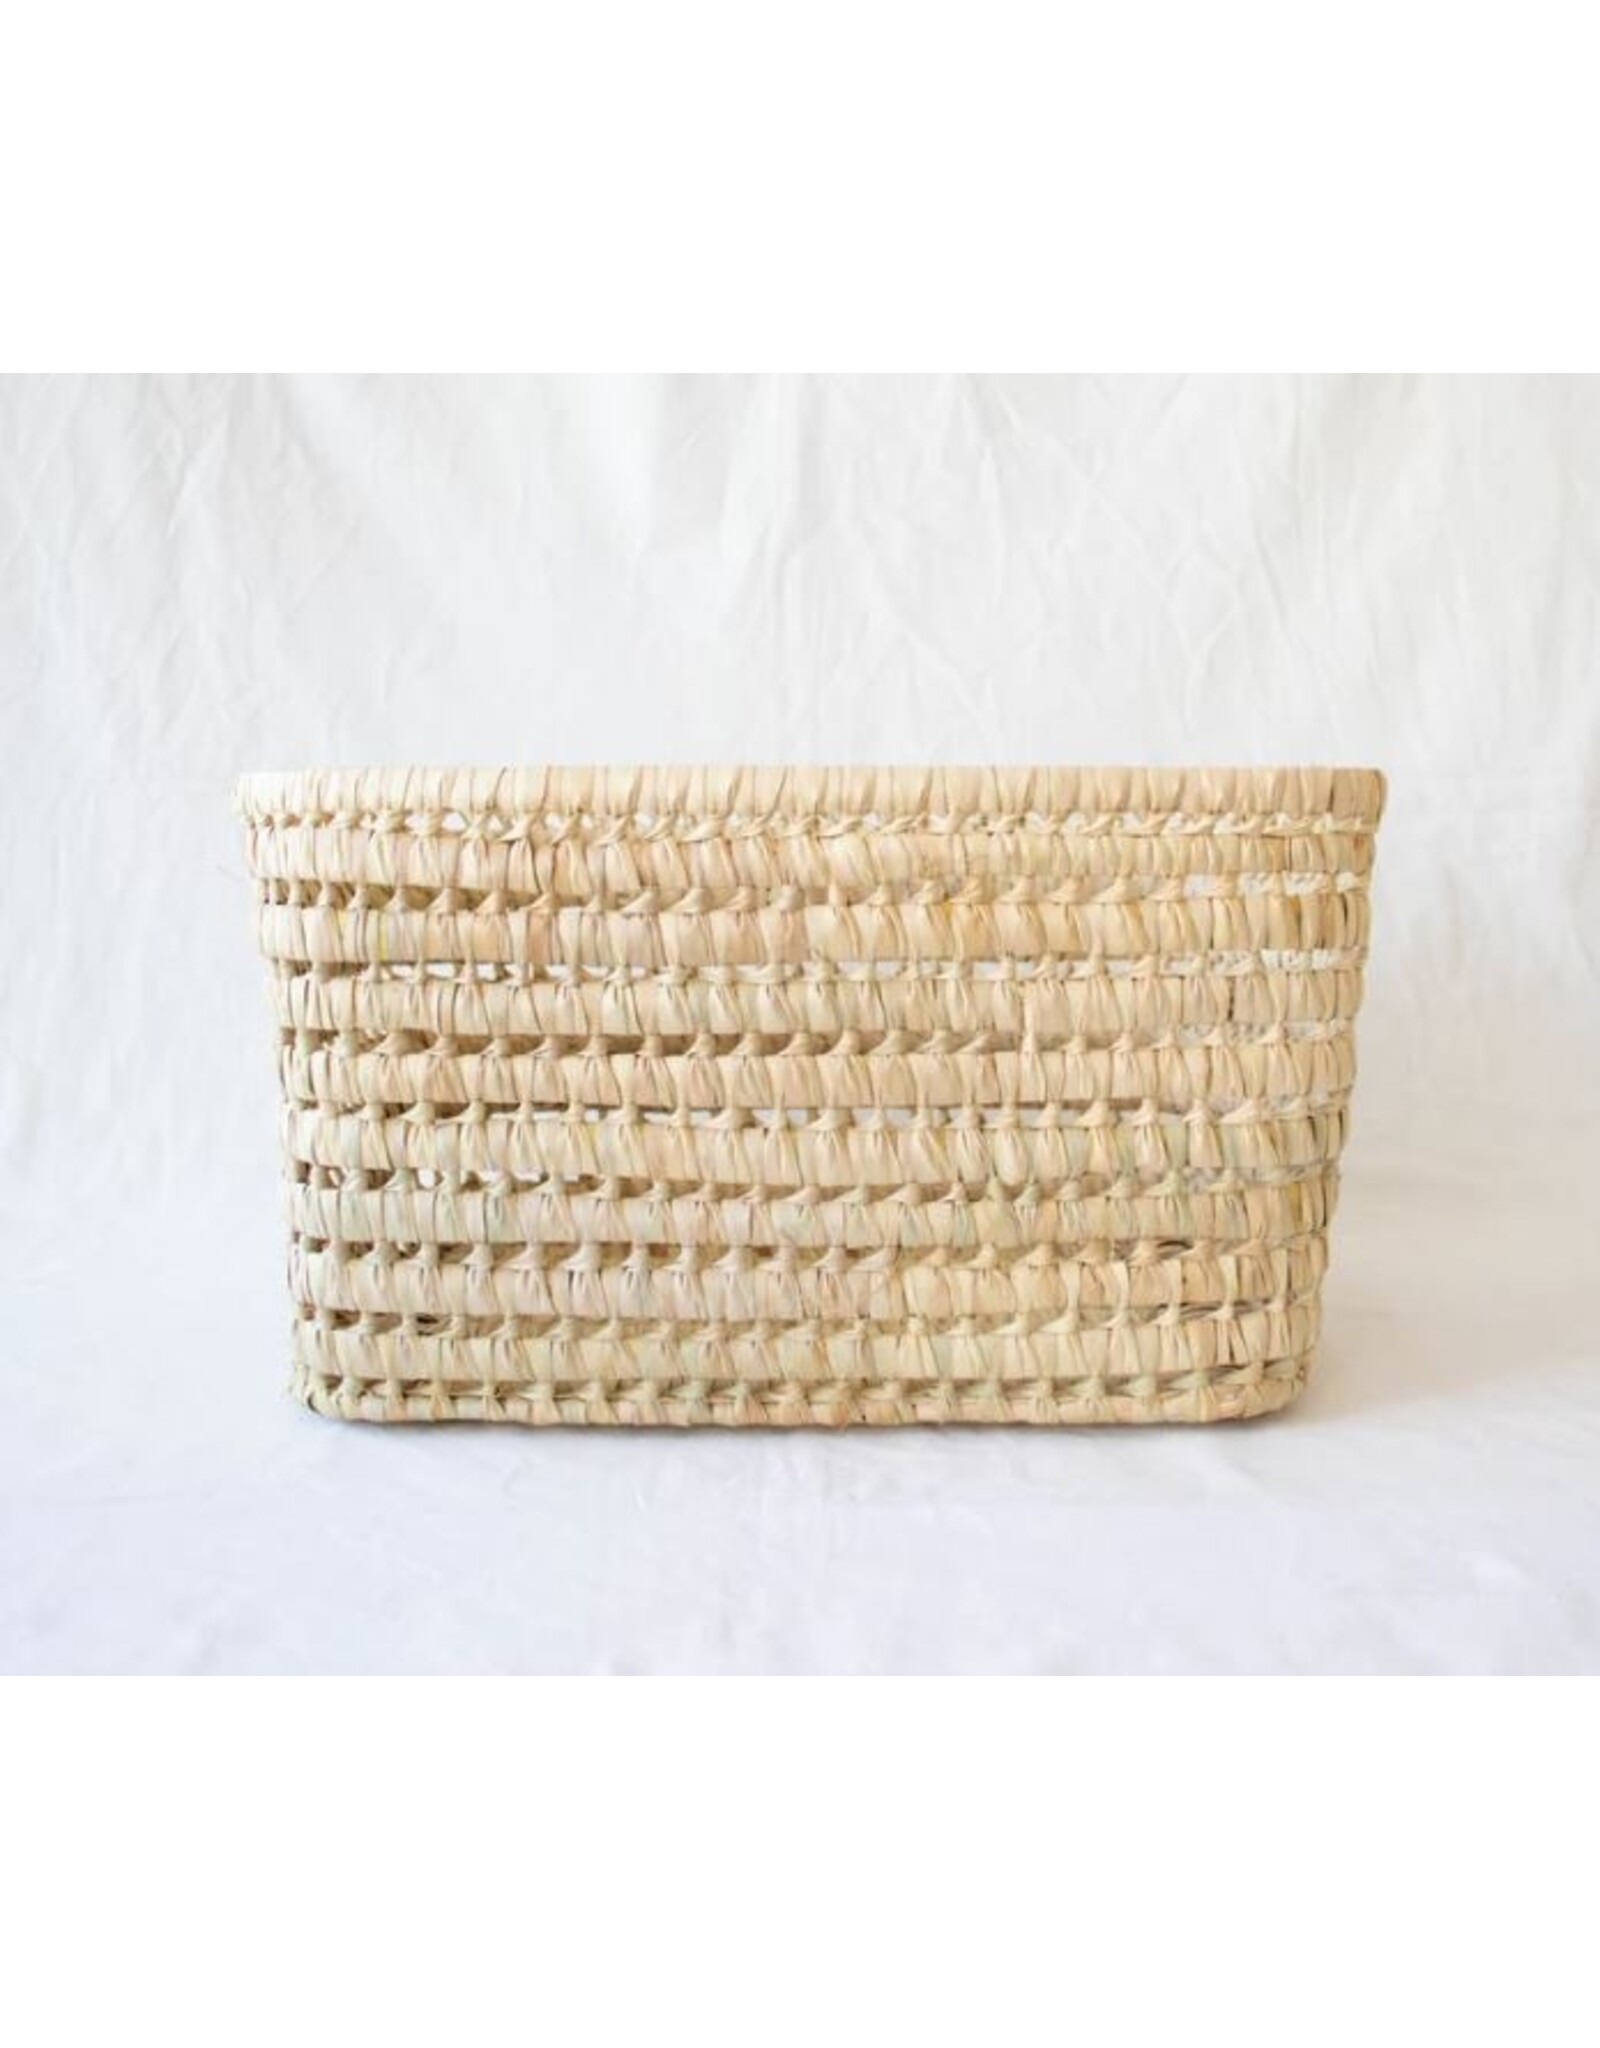 Morocco CLEARANCE Open Weave Storage Basket, Morocco 16"x12"x9"